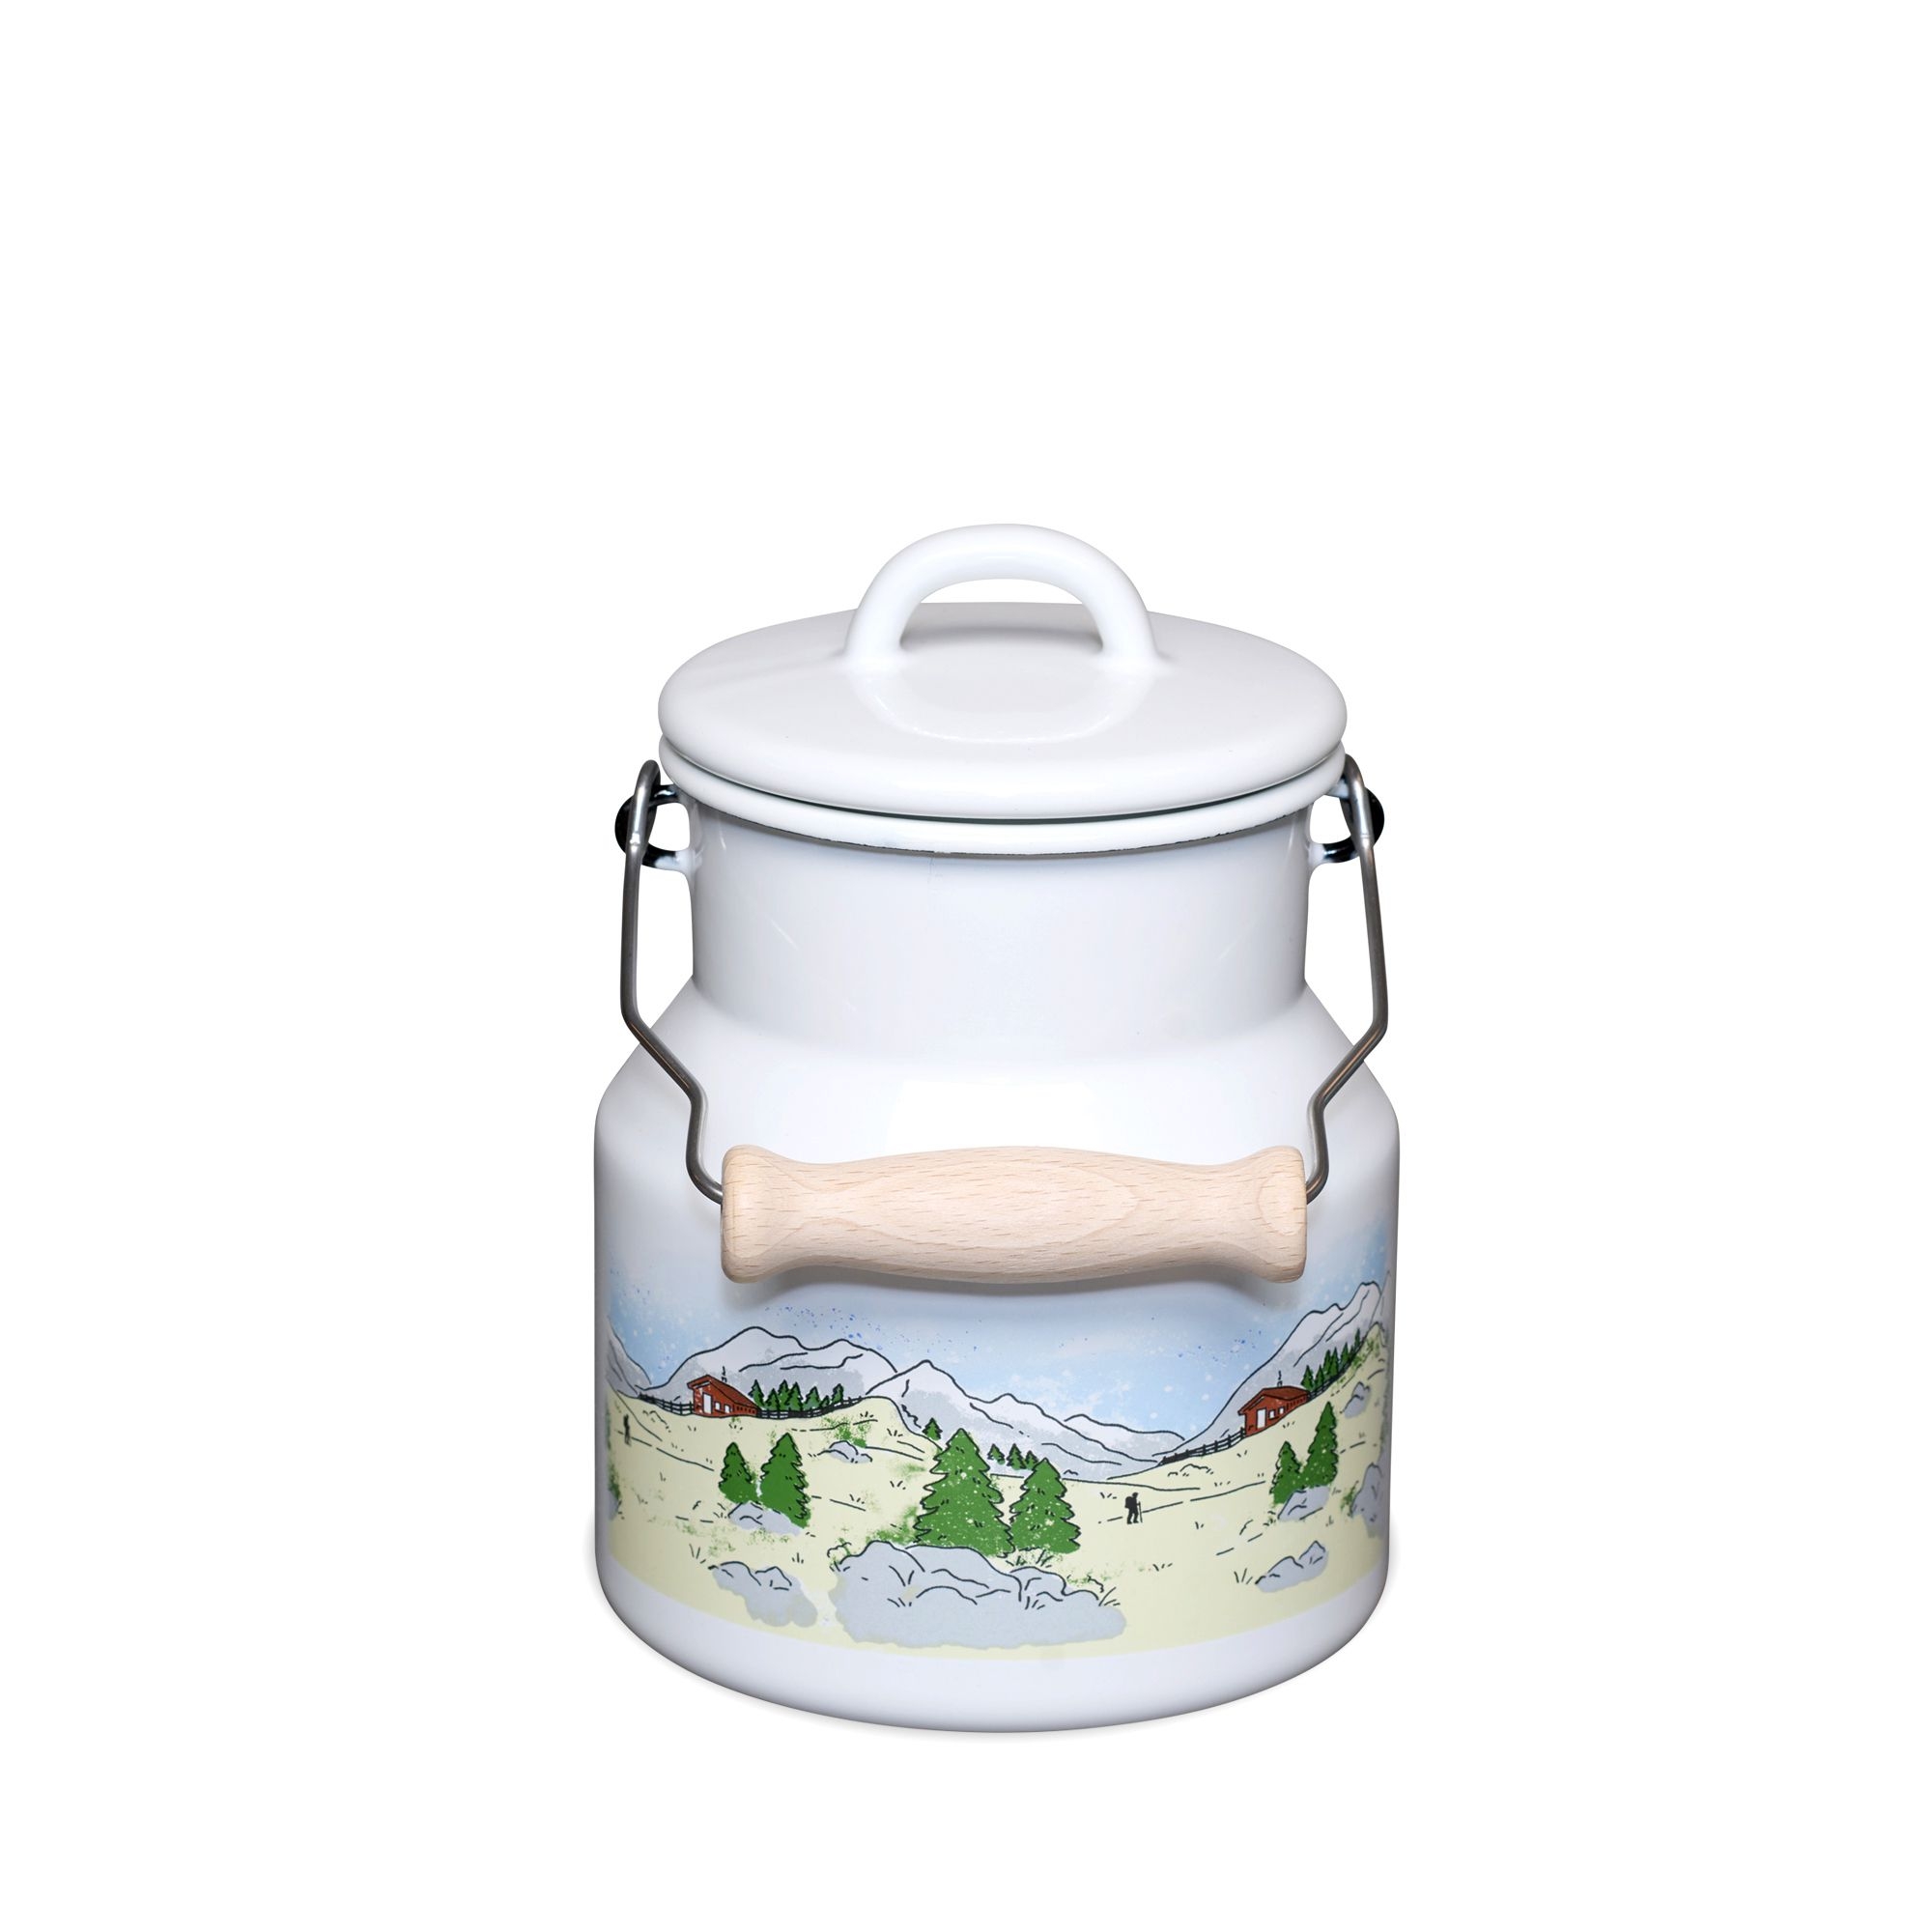 Riess COUNTRY - Landlust - milk jug 1.0 l with lid and wooden handle